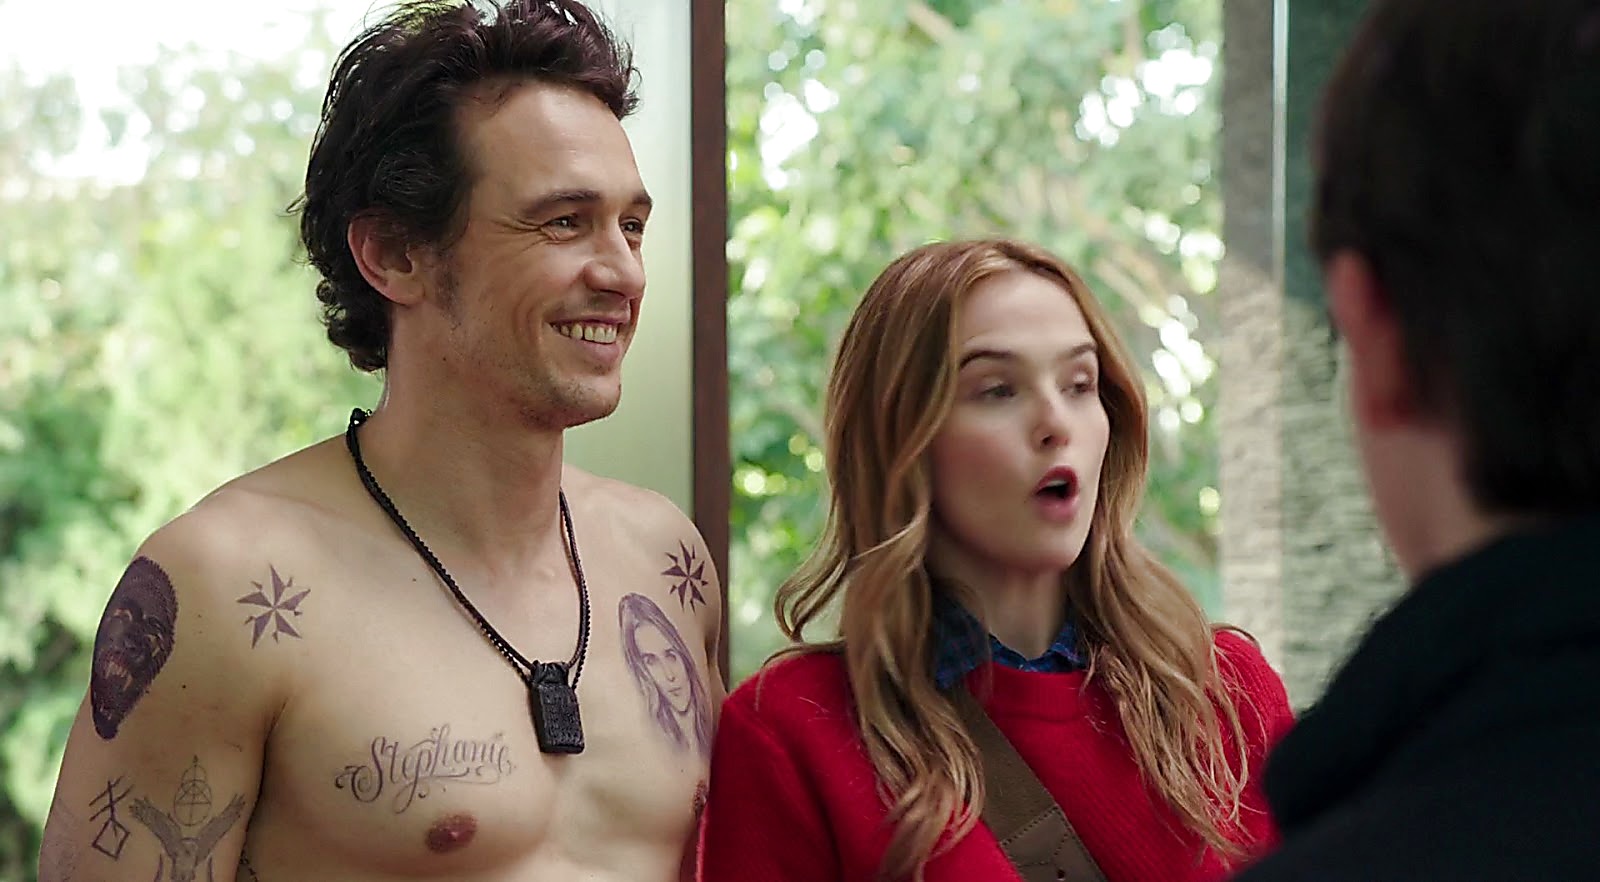 James Franco sexy shirtless scene March 14, 2017, 2pm